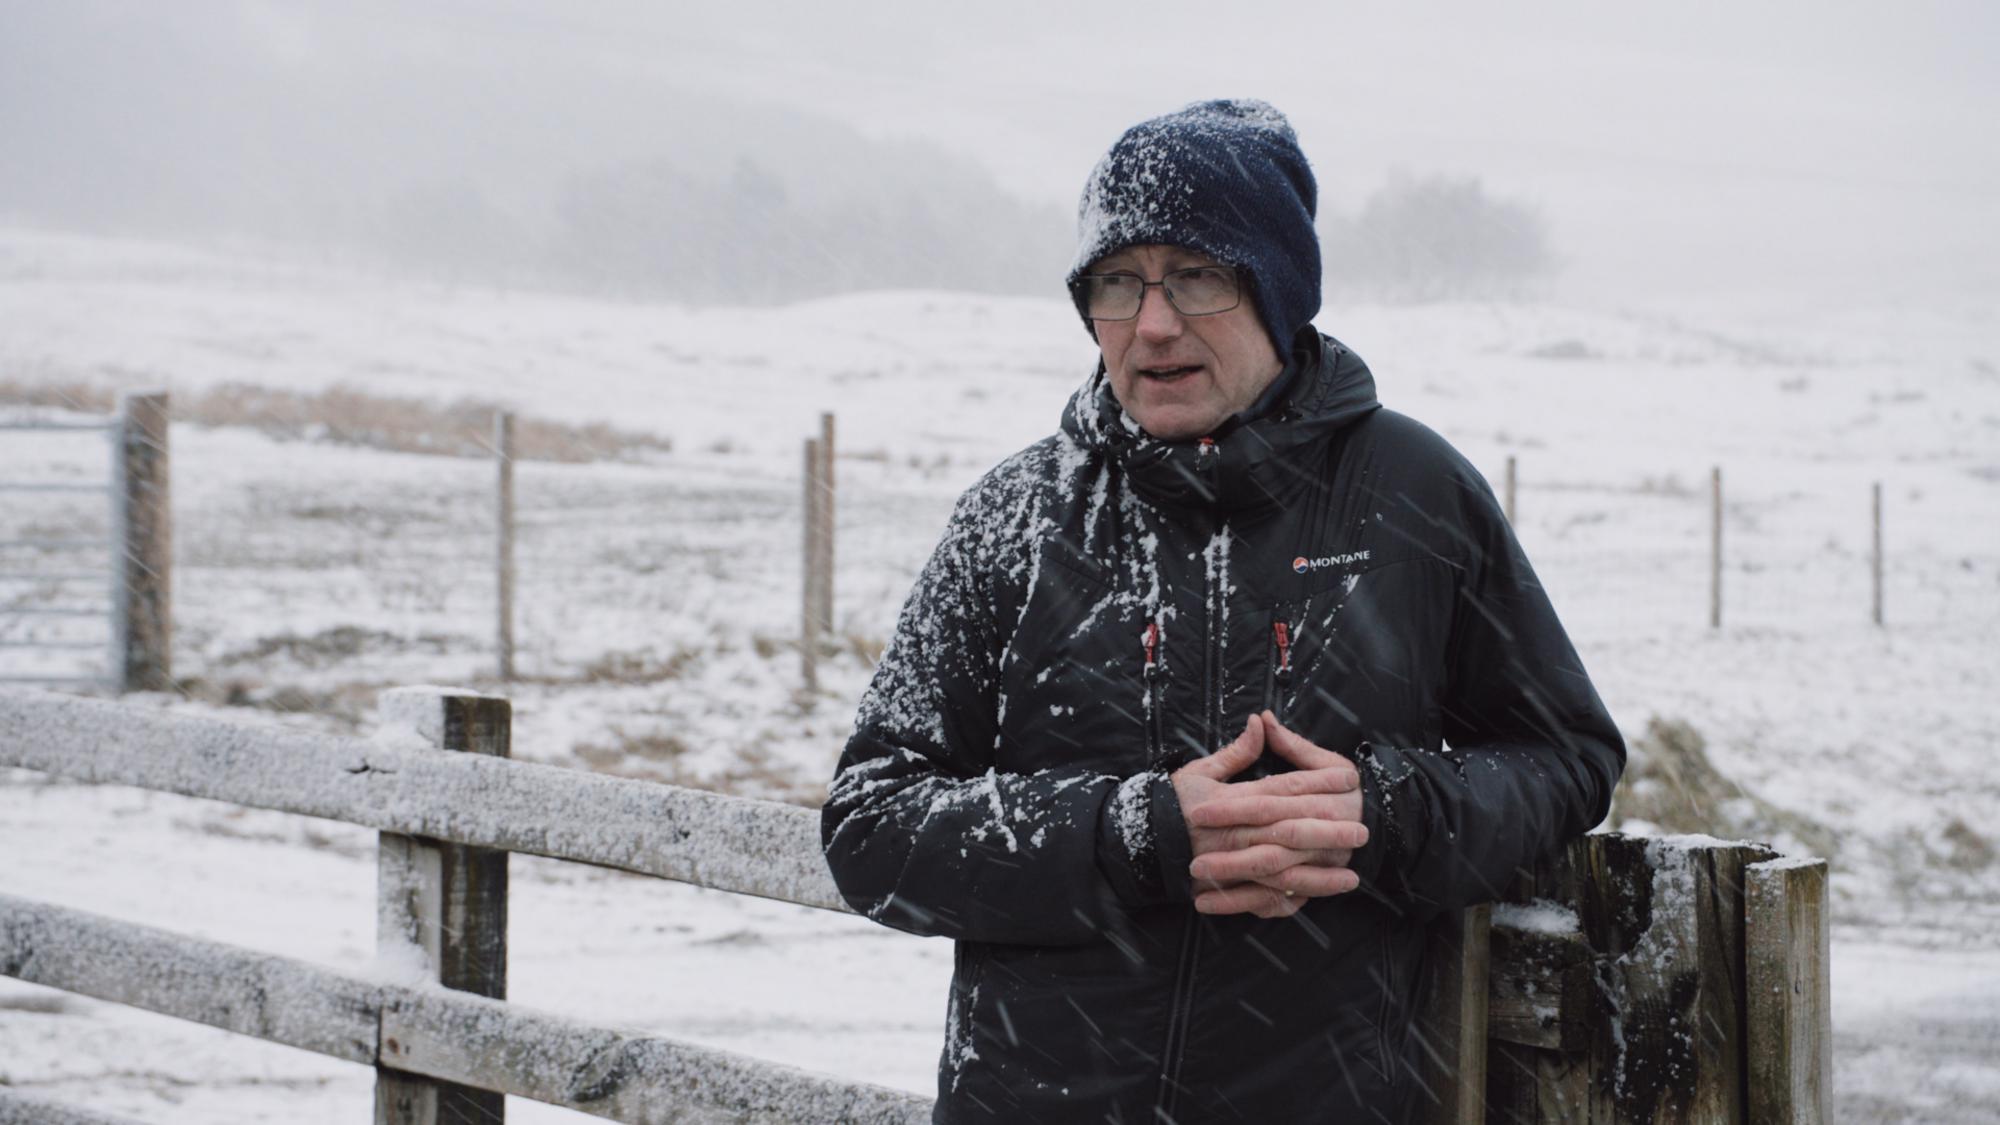 Colin Morrison of Angus Davidson being interviewed for a Peatland ACTION Case study whilst its snowing. Copyright Swift Films Naturescot Peatland ACTION.